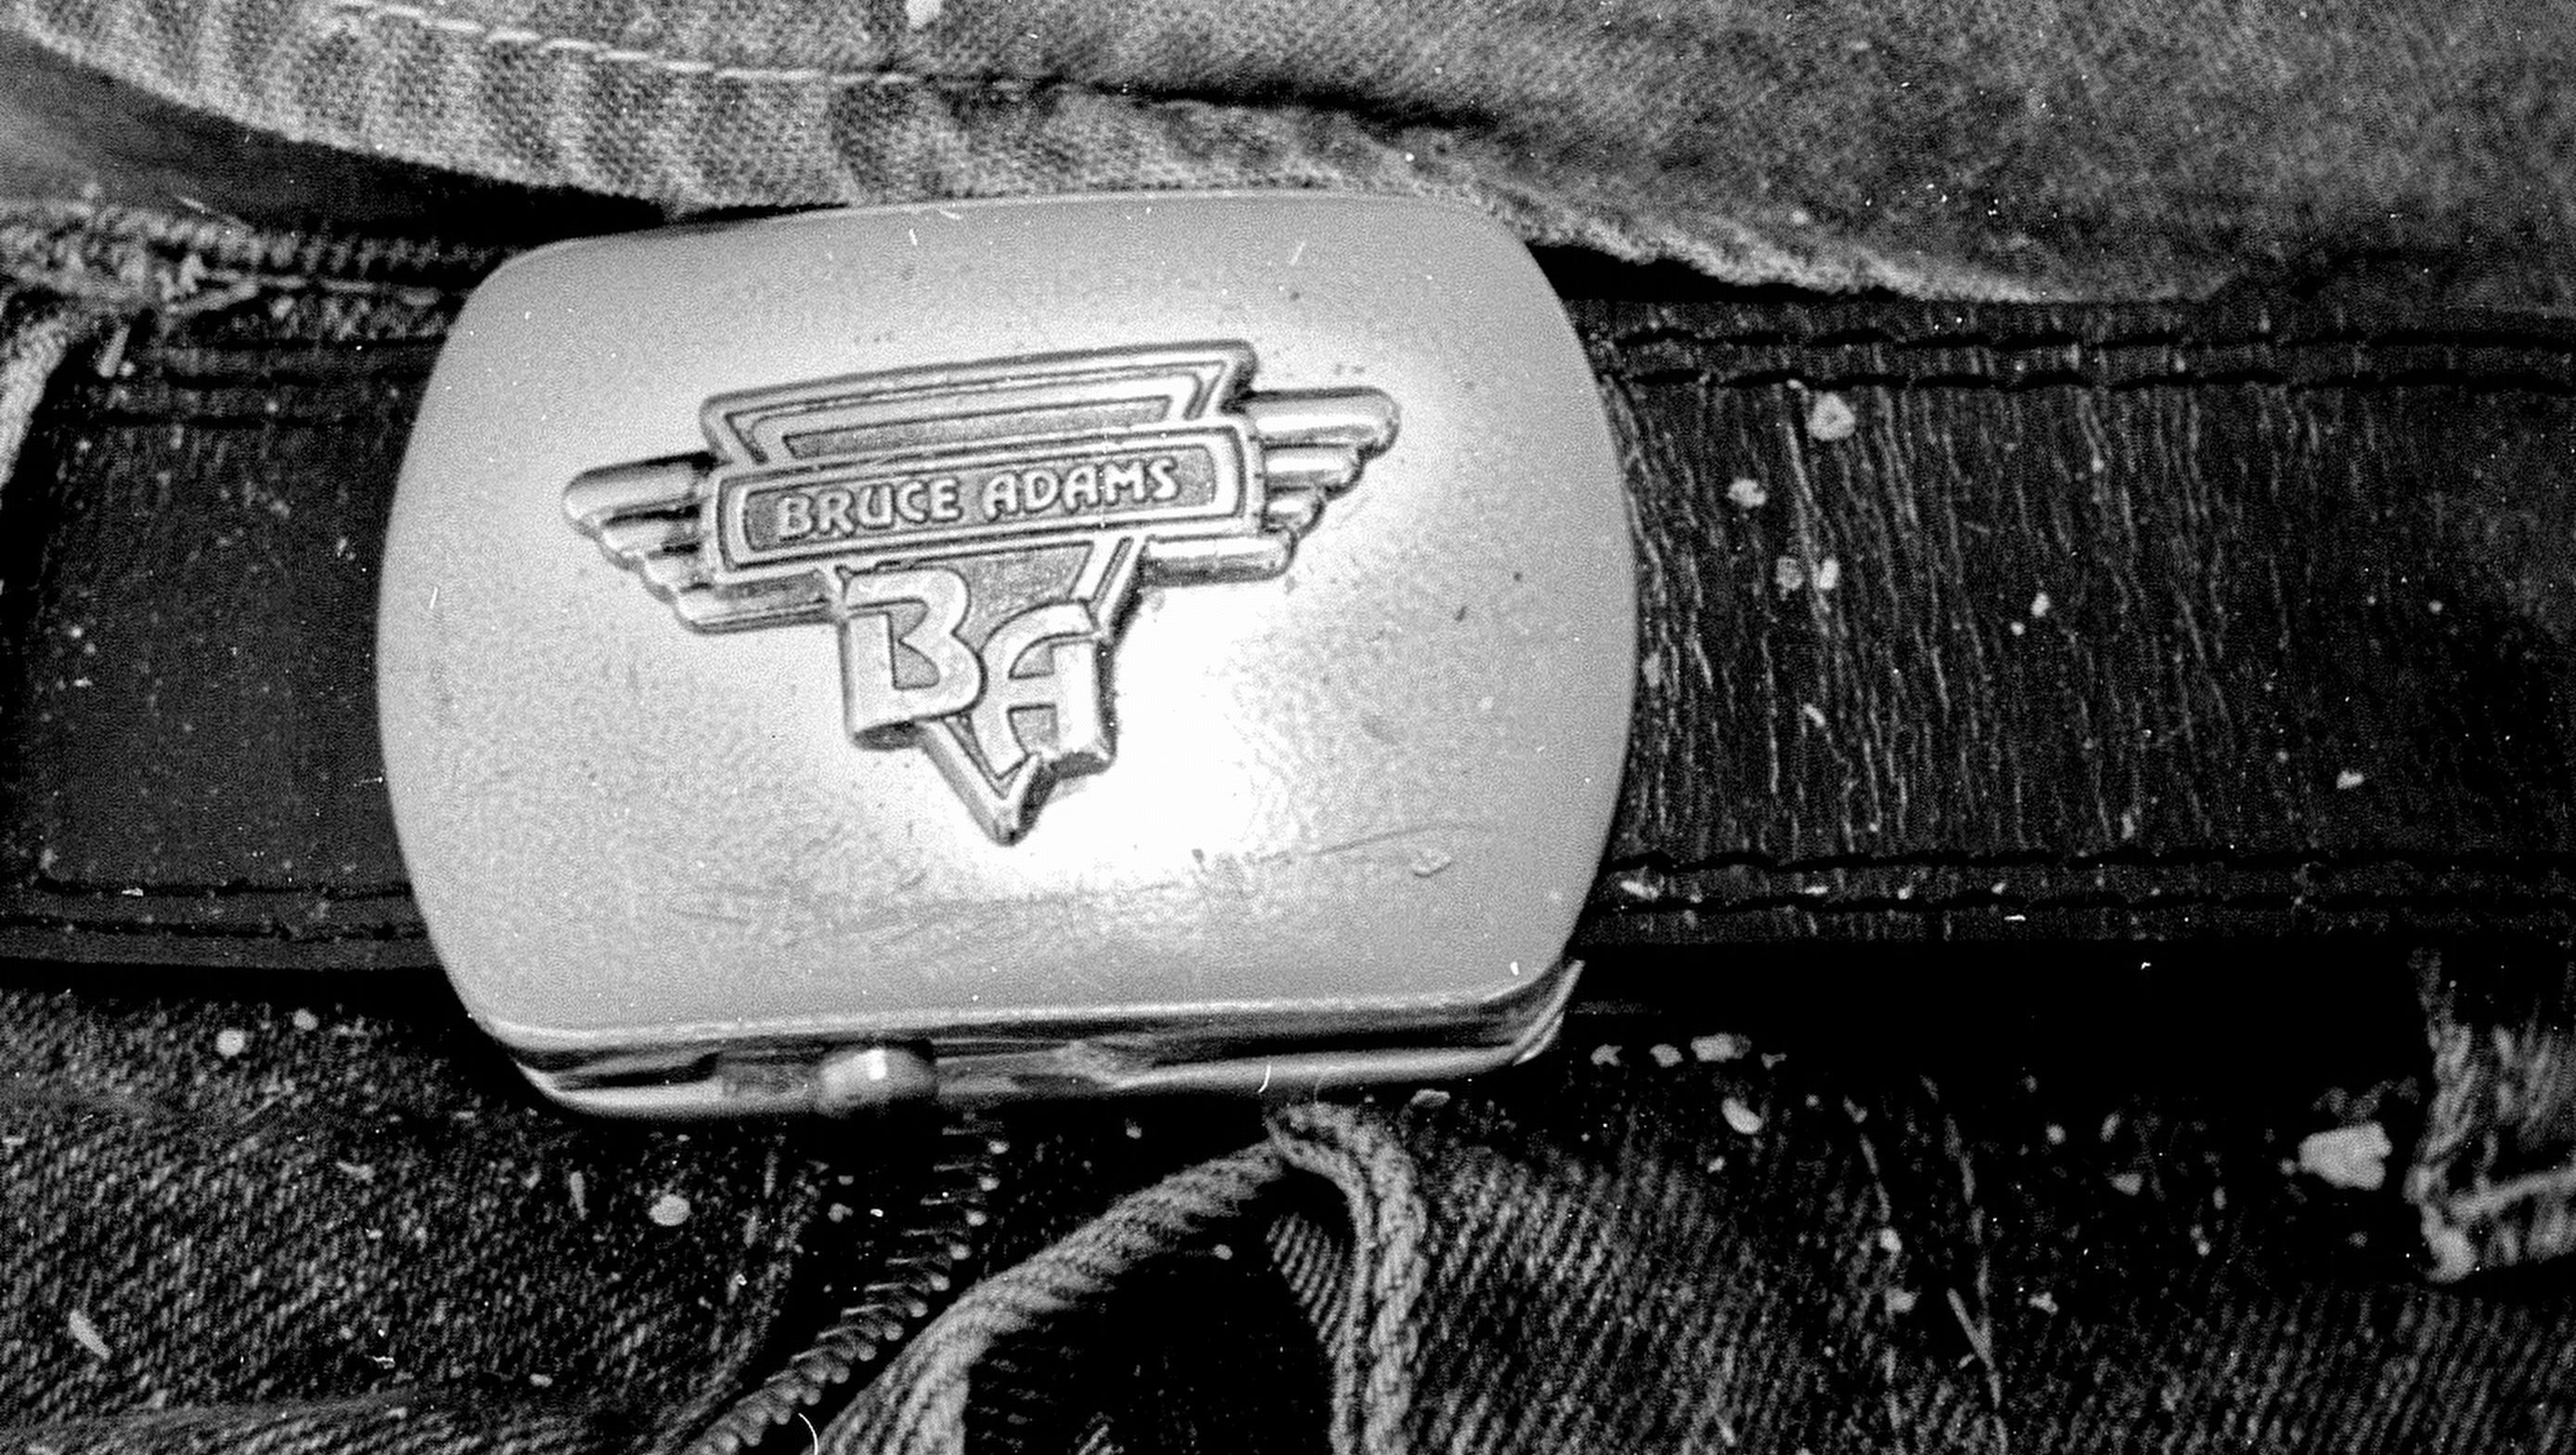 A “Bruce Adams” belt buckle found on the body of a Latino man whose body was discovered in an empty lot in Calexico on June 5, 2000. The man may have been named Lucio Paulino. Photo from John Doe Case #00-081.